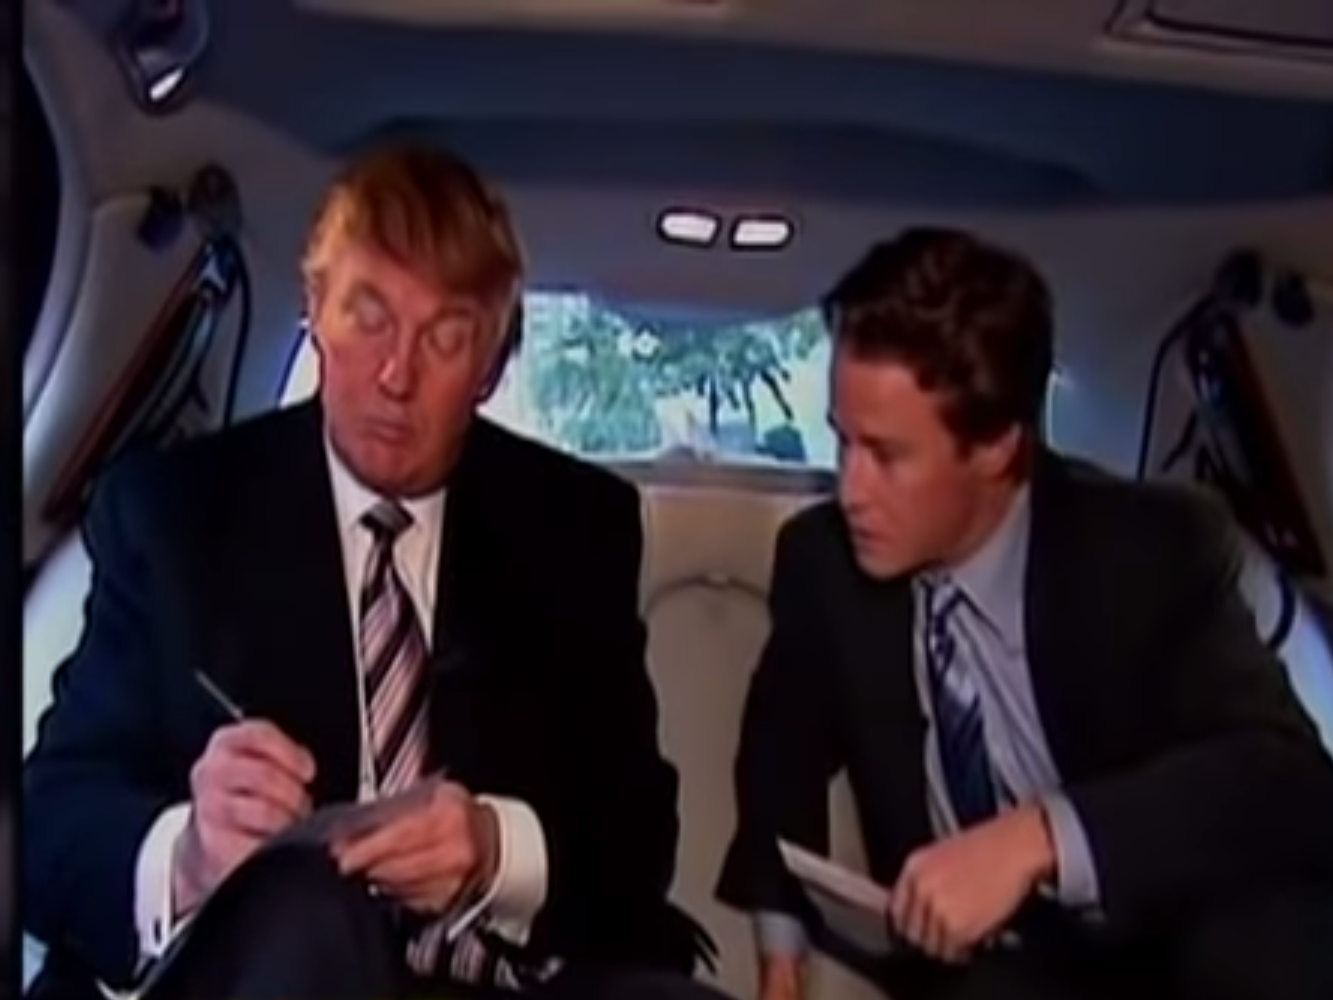 The infamous tape of Donald Trump’s misogynistic rant is from a 2004 episode of ‘Access Hollywood’